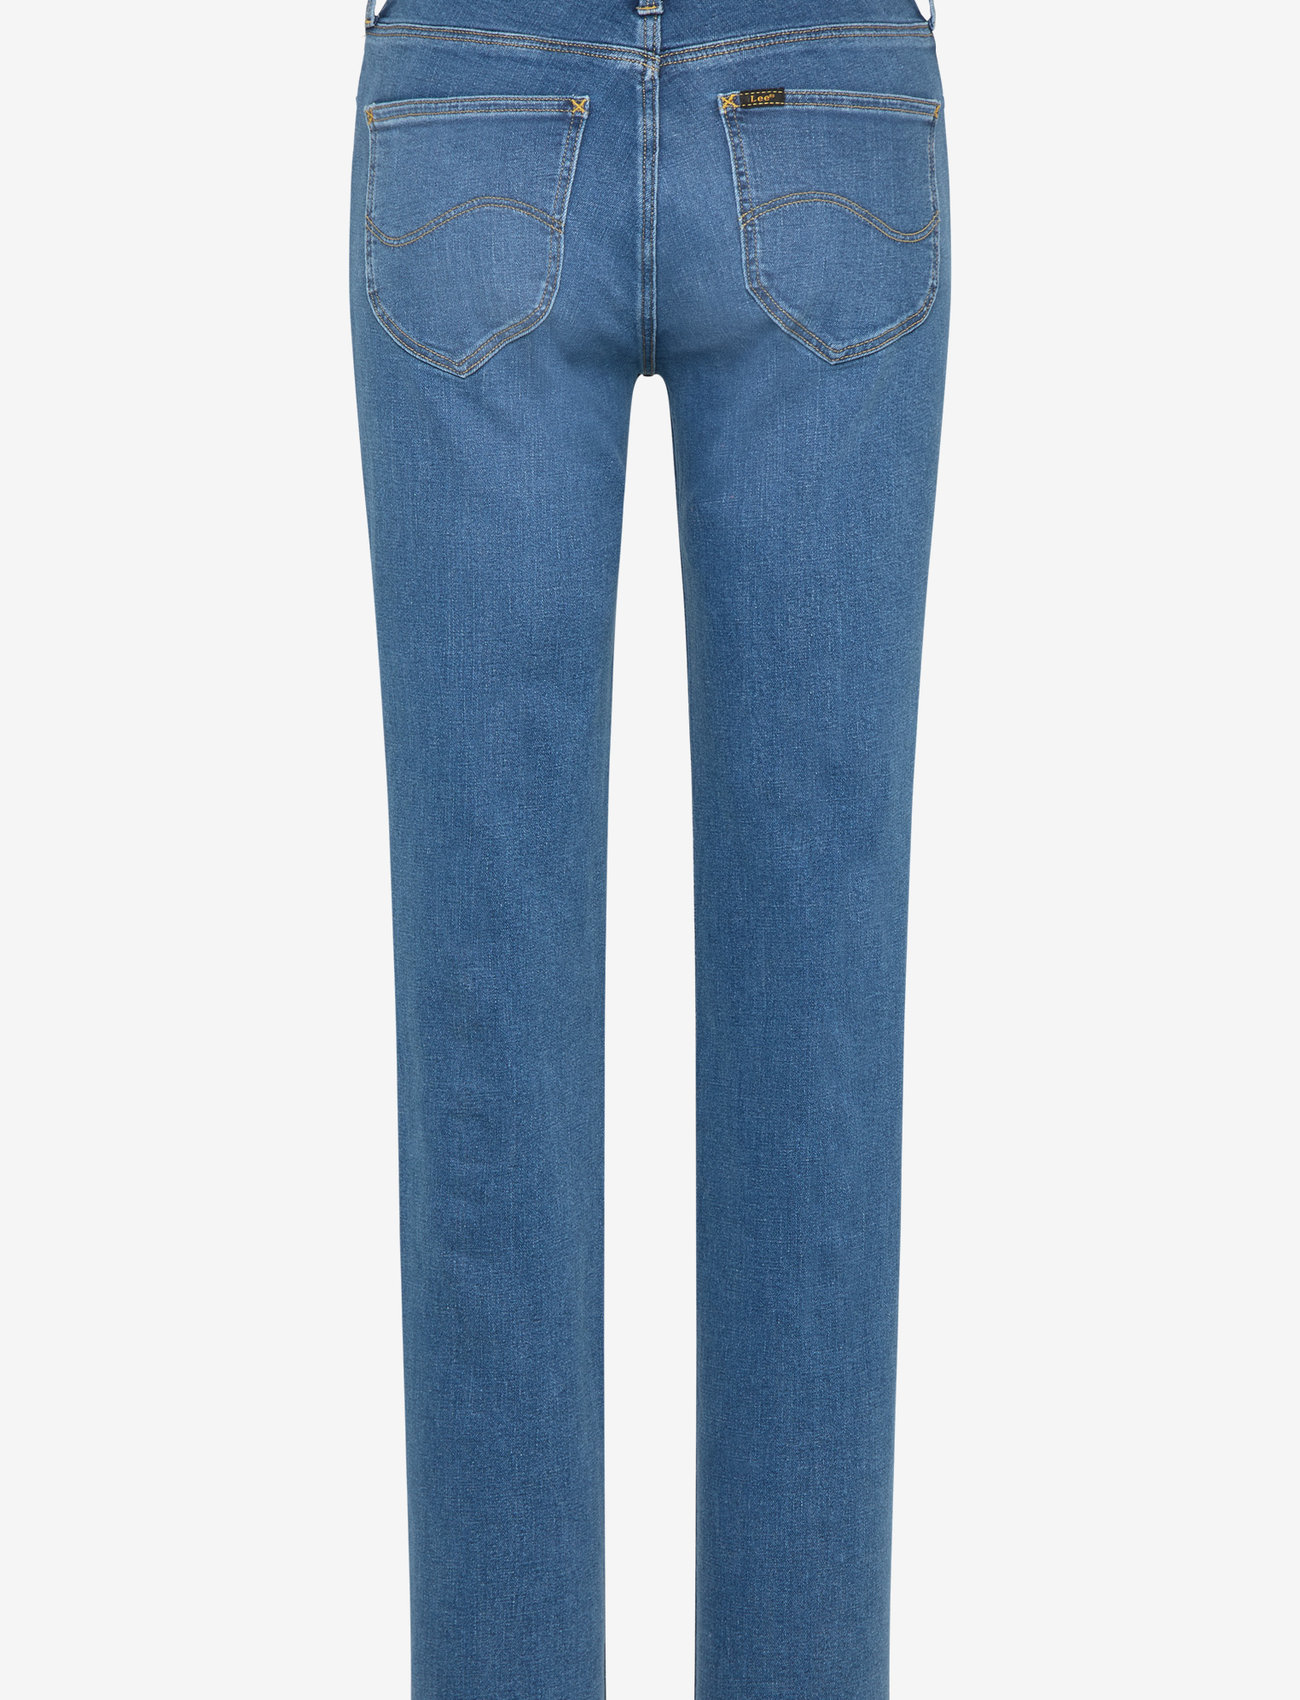 Lee Jeans - MARION STRAIGHT - straight jeans - mid ada - 1